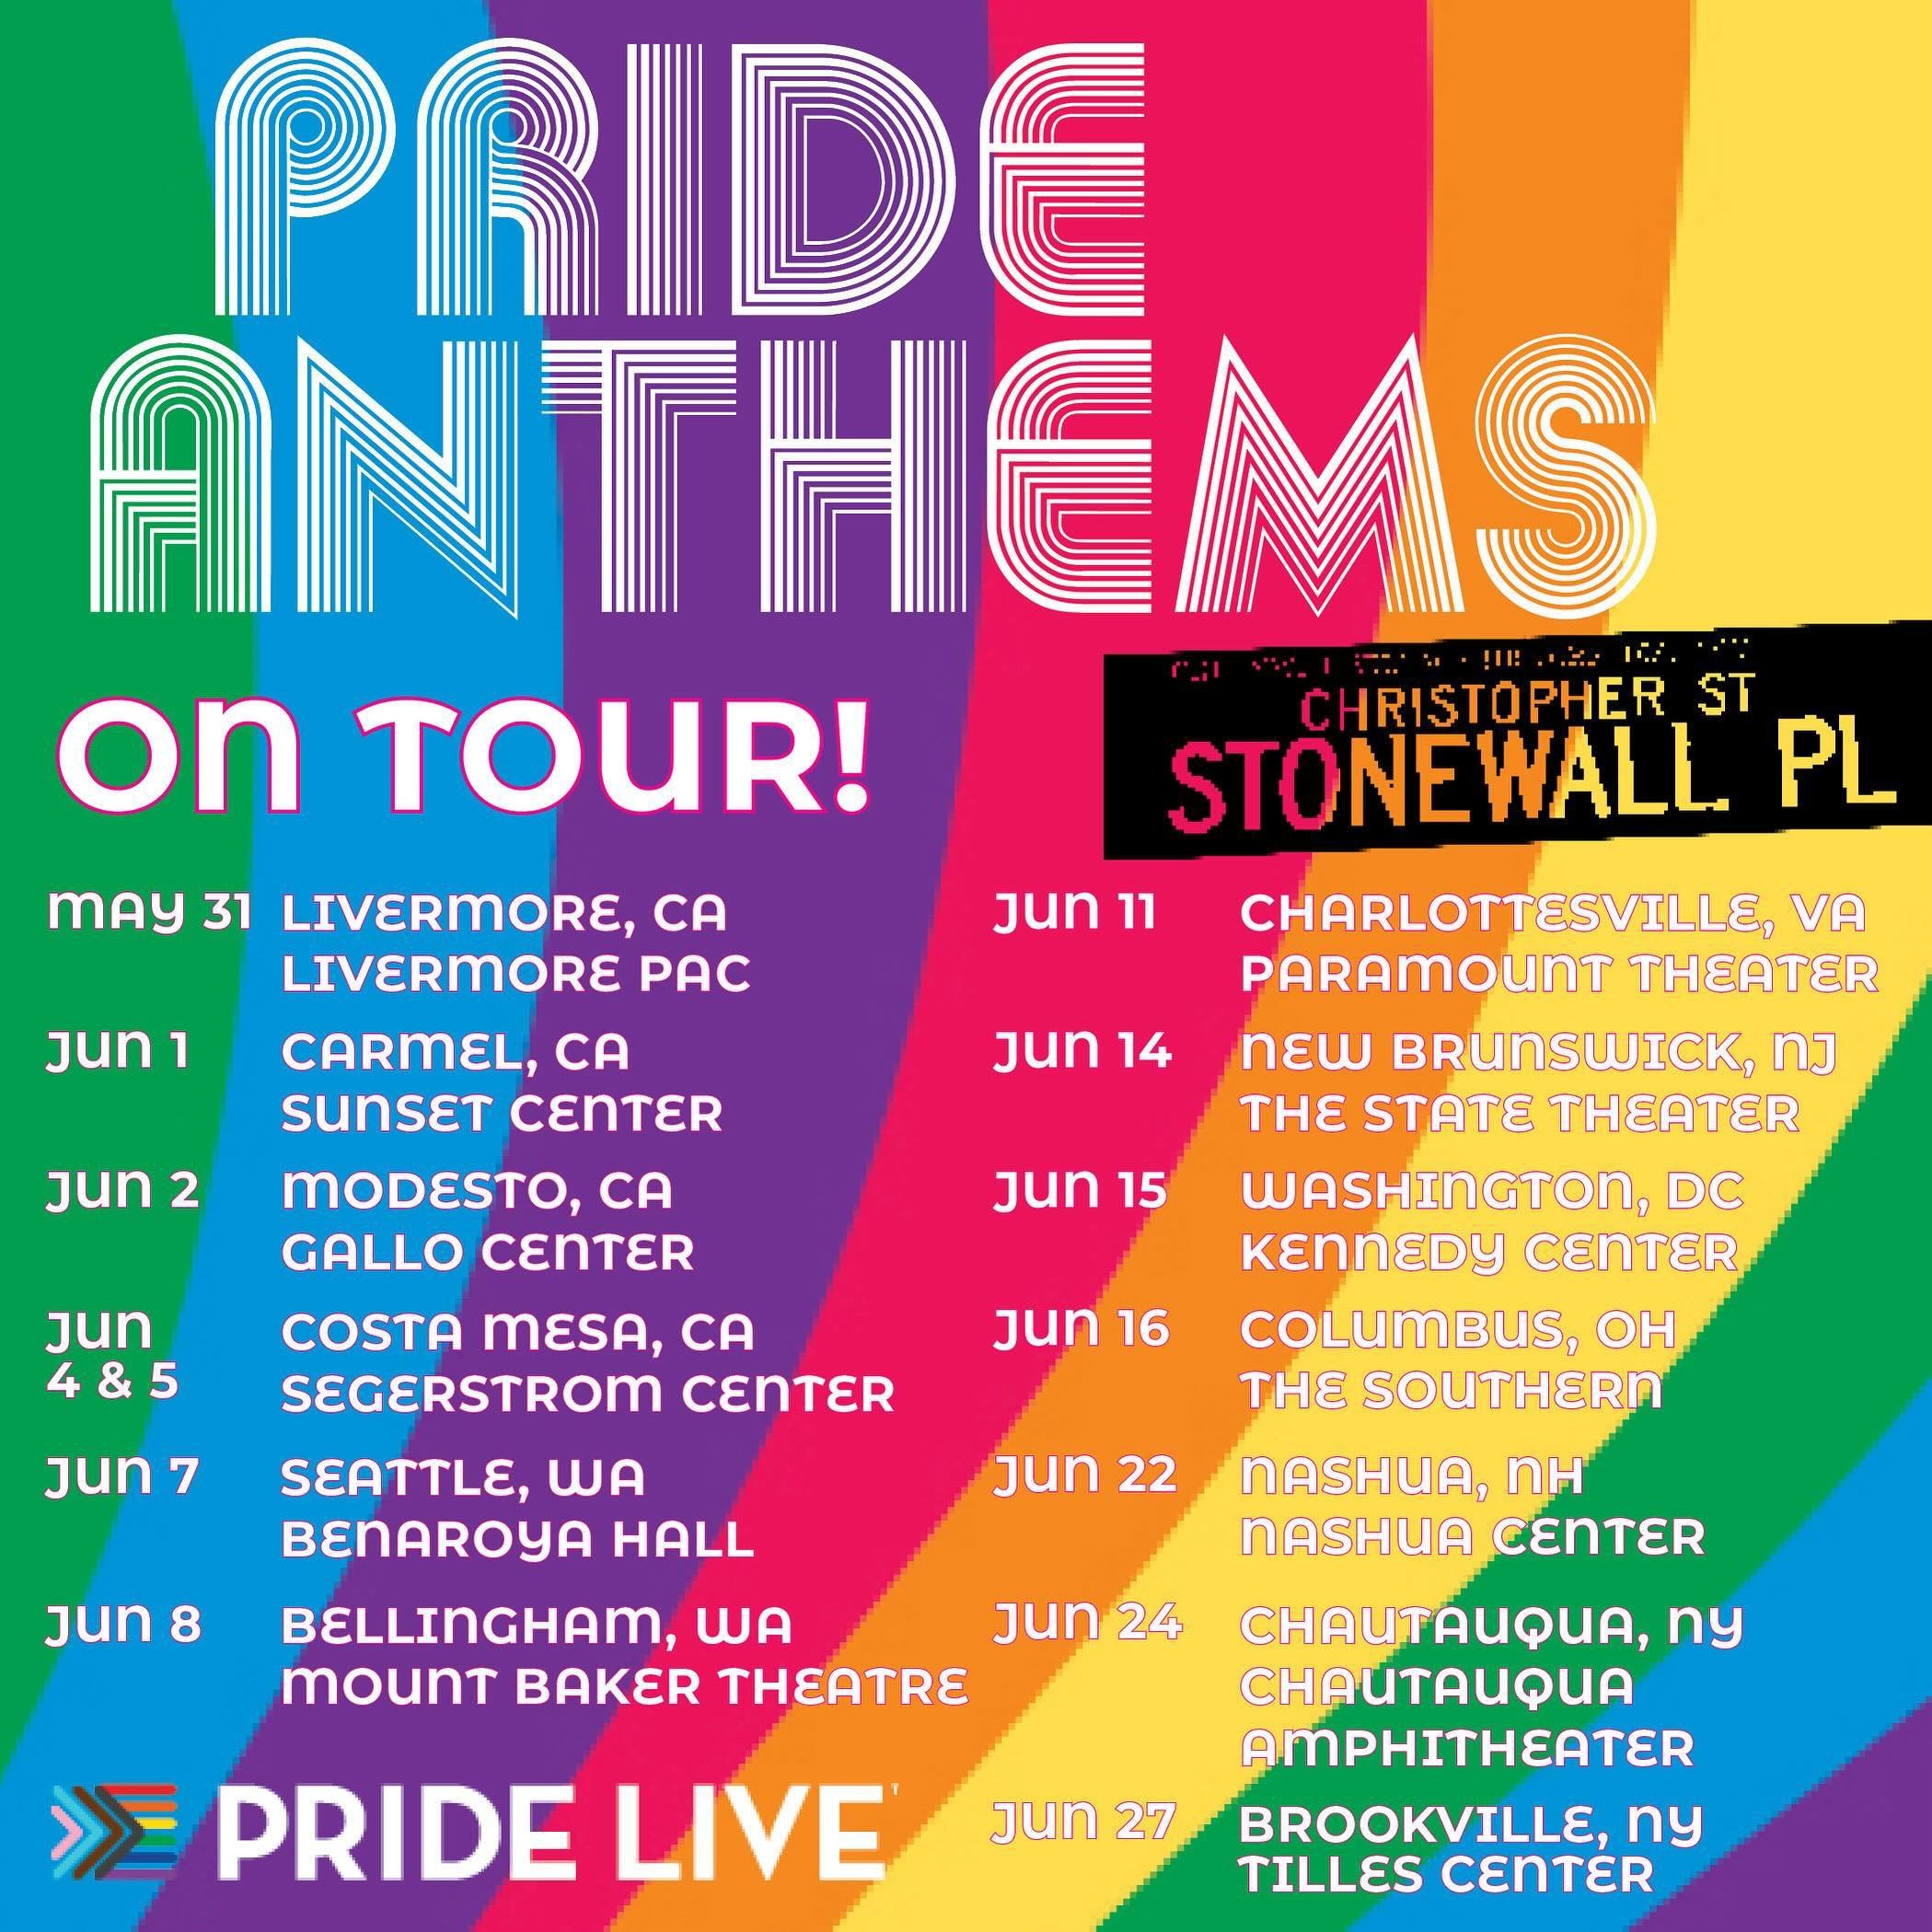 Psyched to hit the road again with PRIDE ANTHEMS in June! We&rsquo;re celebrating Pride month and spreading love from coast to coast. Come dance with us! 🌈 

#pridelive #drummer #femaledrummer #WEAREPRIDEANTHEMS 

@vicfirth @sabiancymbals @yamahadru